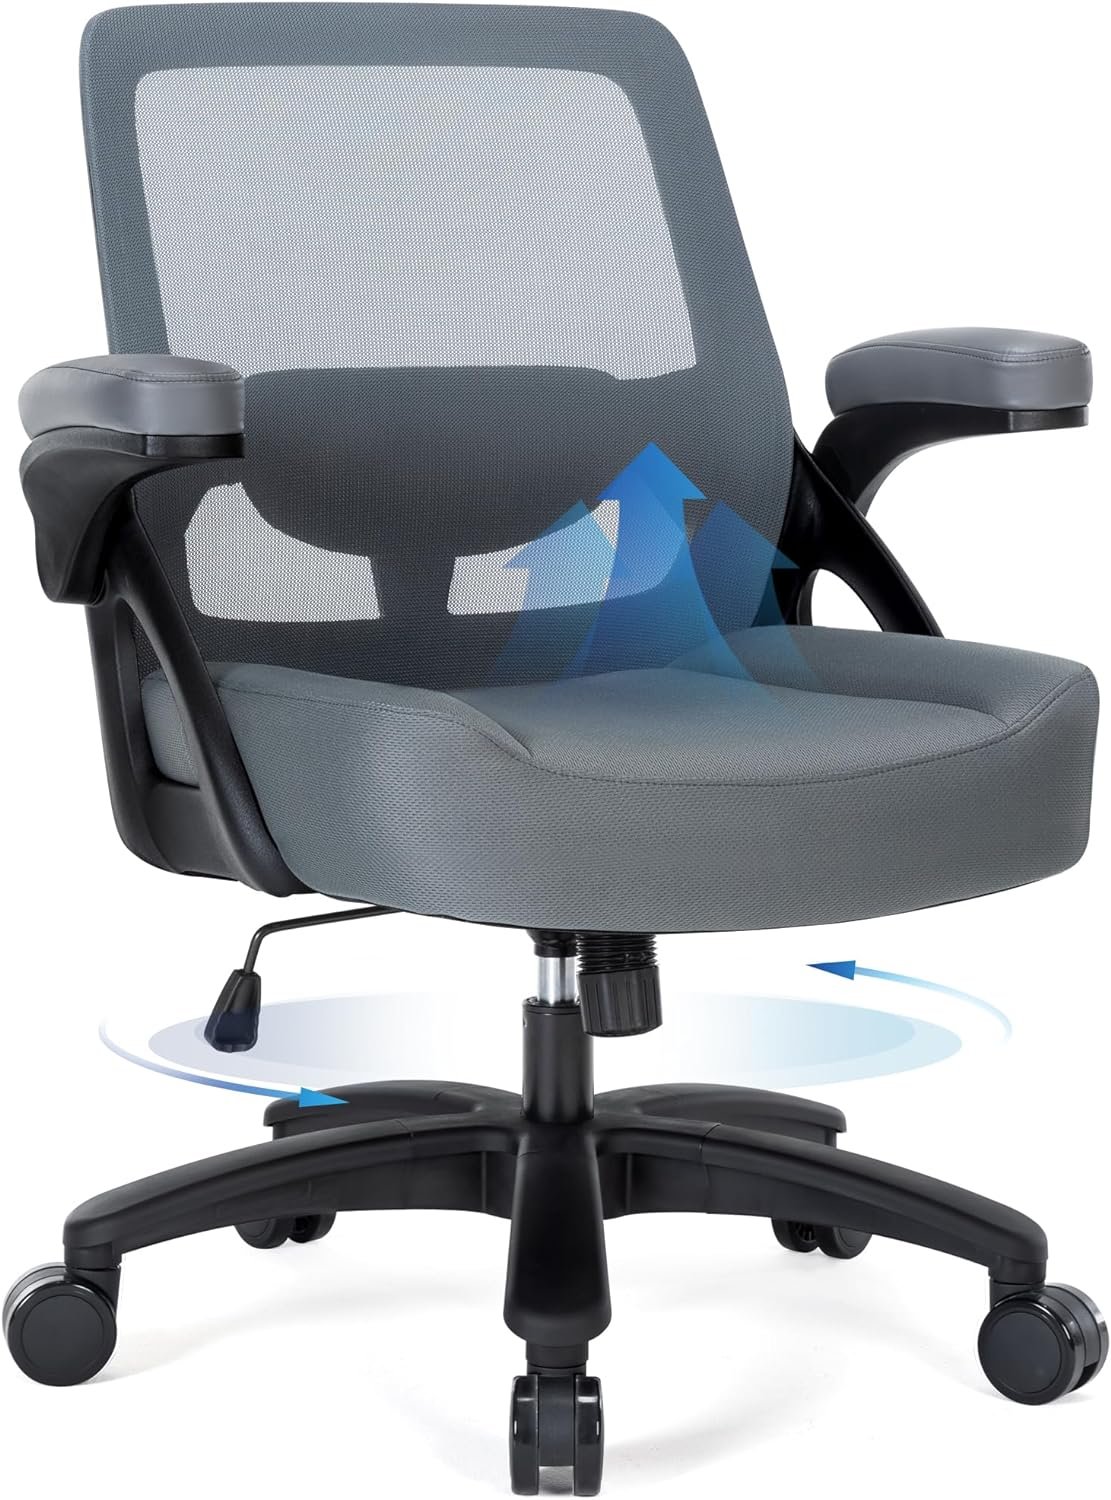 400lb Big and Tall Office Chair, Ergonomic Mesh Desk Chair with Flip Arms,Heavy Duty Home Office Desk Chair, Wide Seat Computer Chair for Heavy People, Executive Rolling Swivel Task Chair for Adults